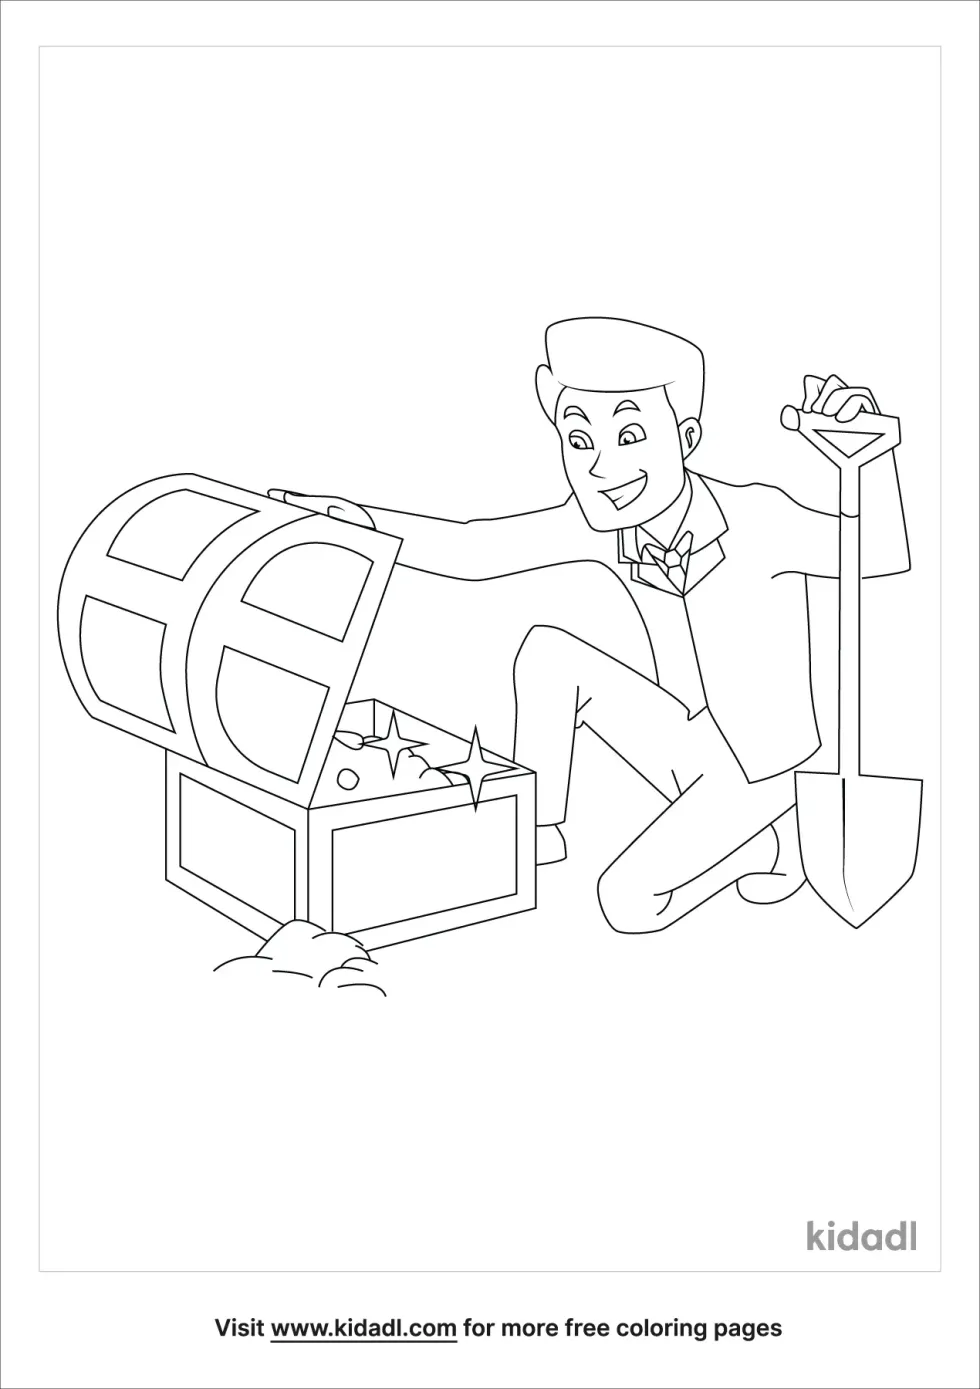 Digging For Treasure Coloring Page